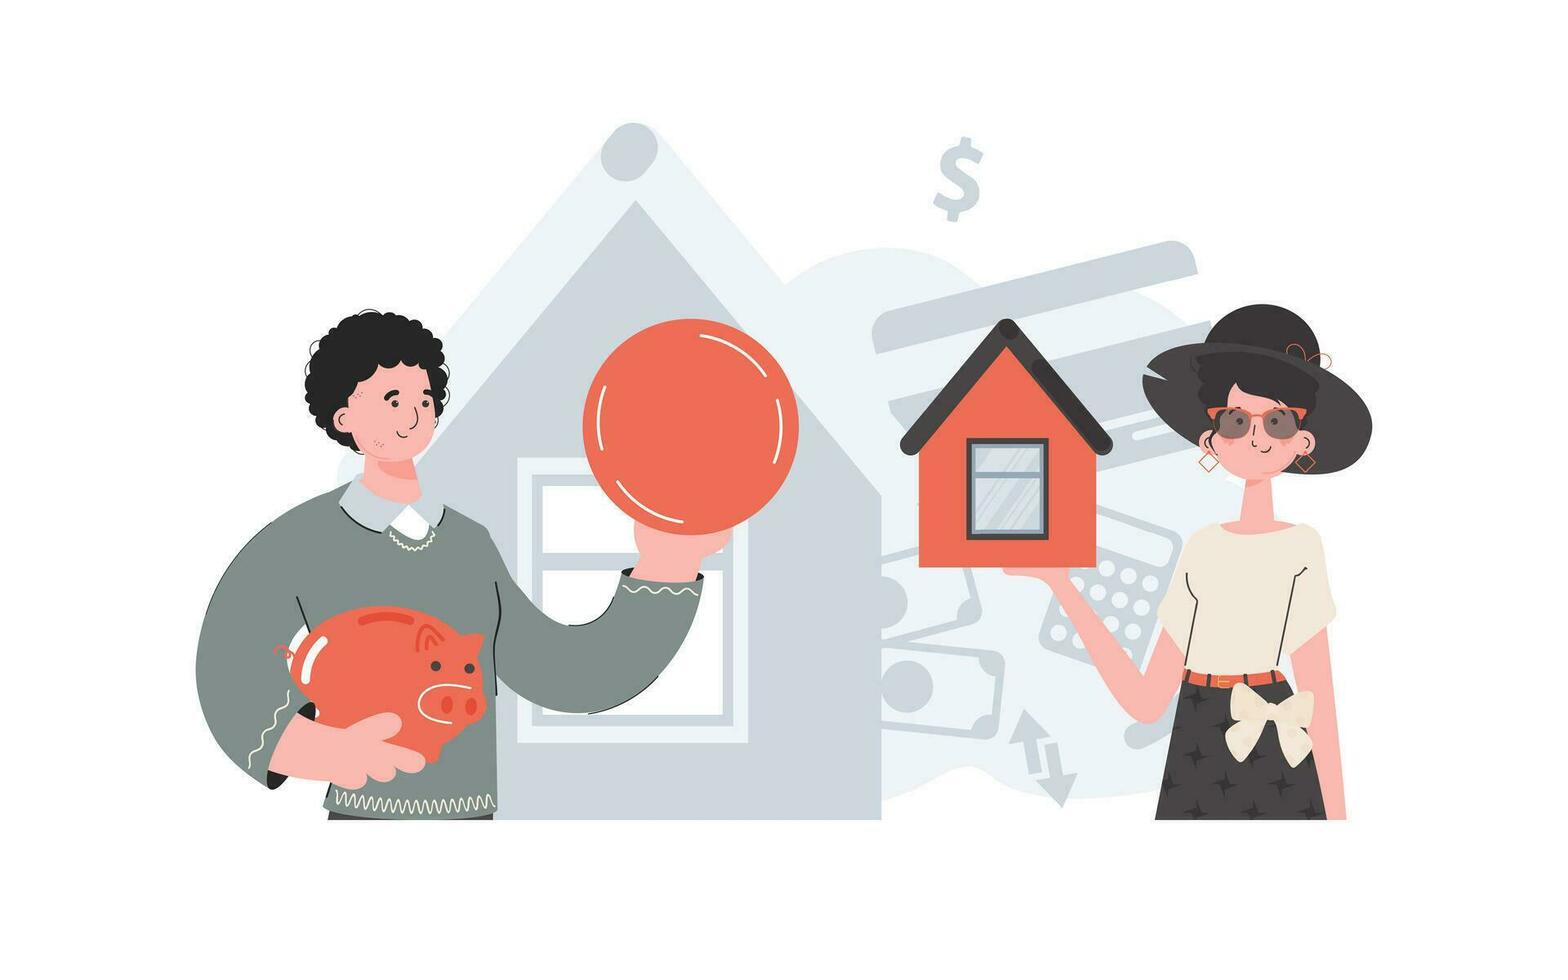 The family buys a house. Real estate purchase concept. People are depicted to the waist. Trend vector illustration.